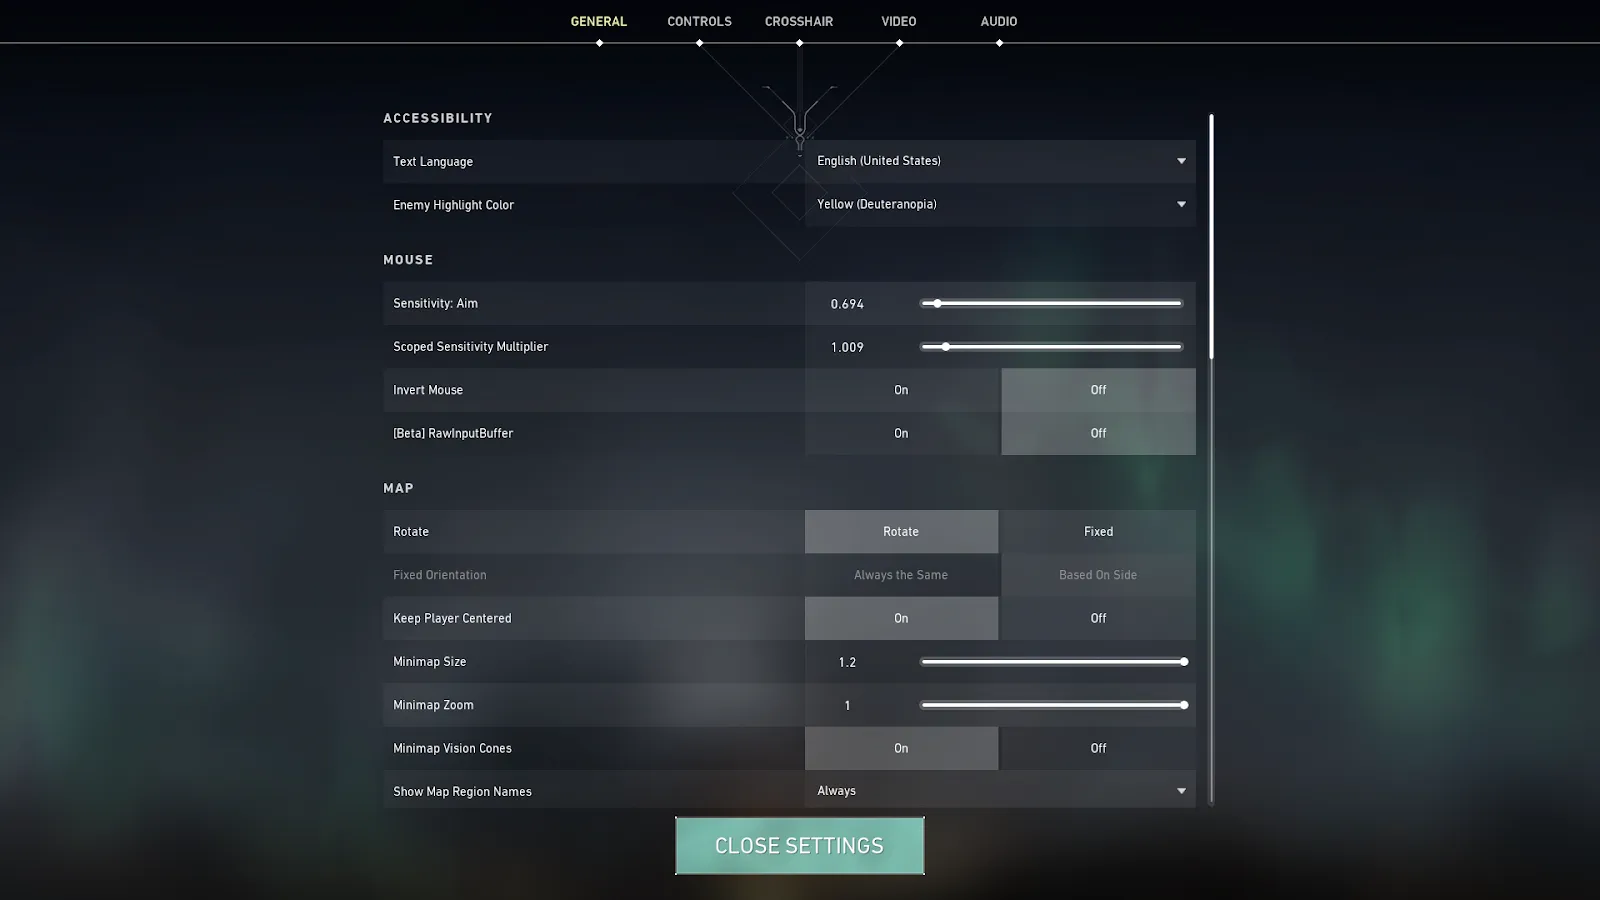 The mouse settings are shown